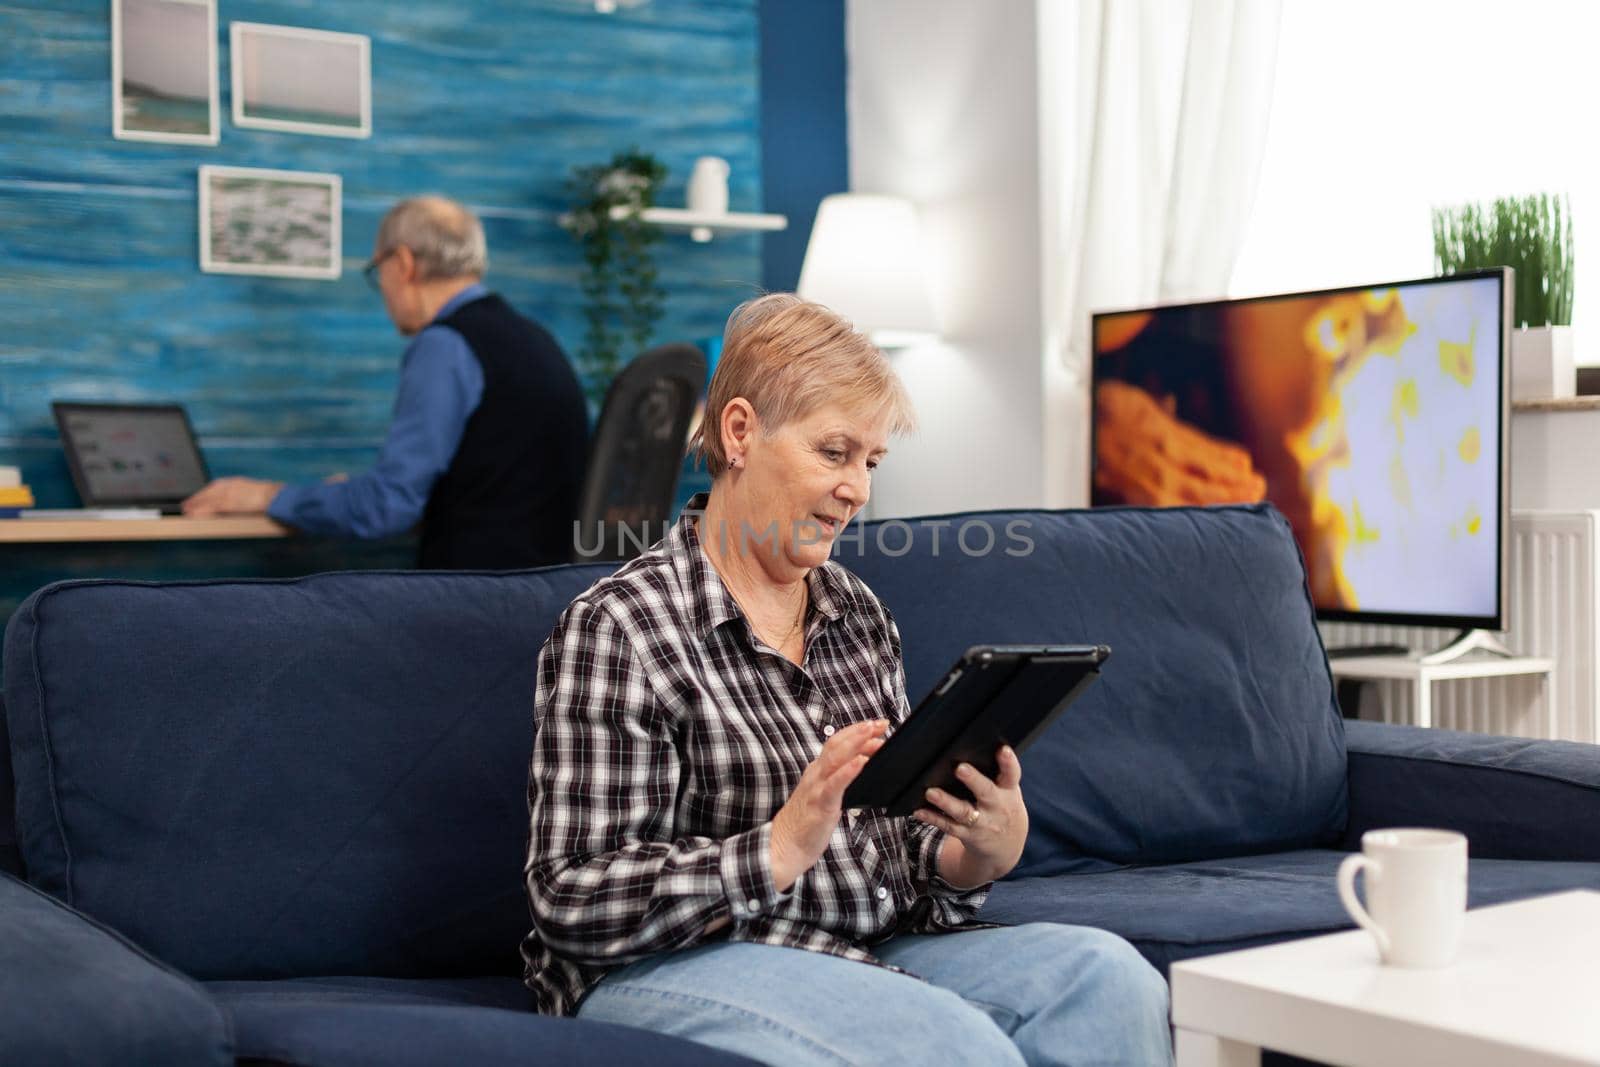 Happy mature woman relaxing on couch enjoying retirement lifestyle. Elderly woman using moder technoloy tablet pc in home living room and husband working on laptop computer